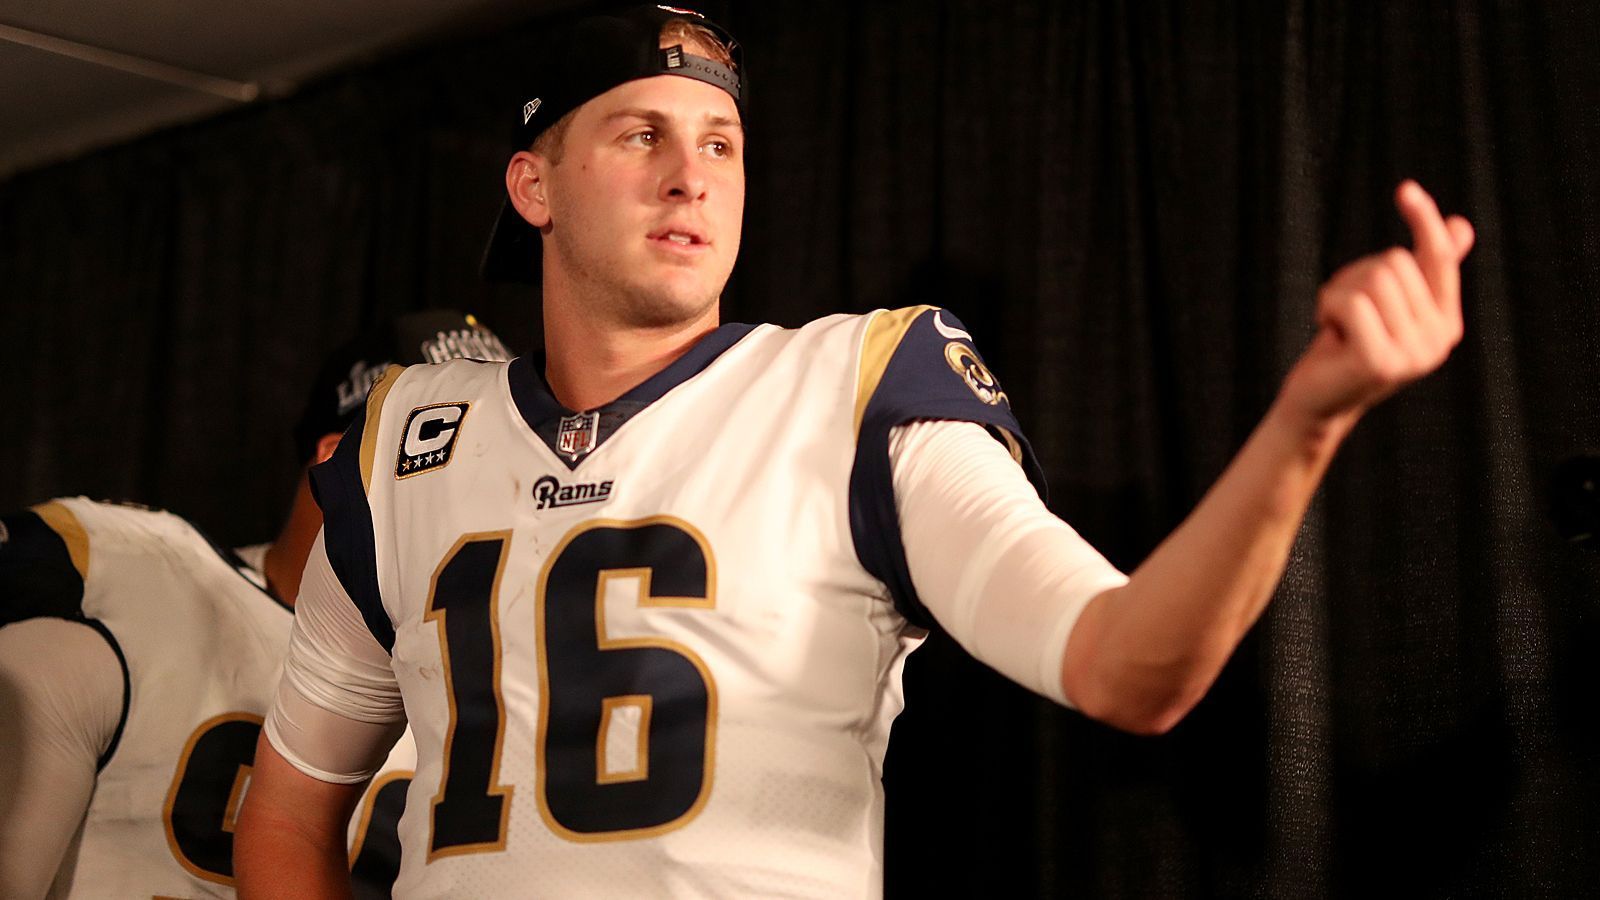 
                <strong>Jared Goff</strong><br>
                Jared Thomas Goff (Quarterback der Los Angeles Rams)
              